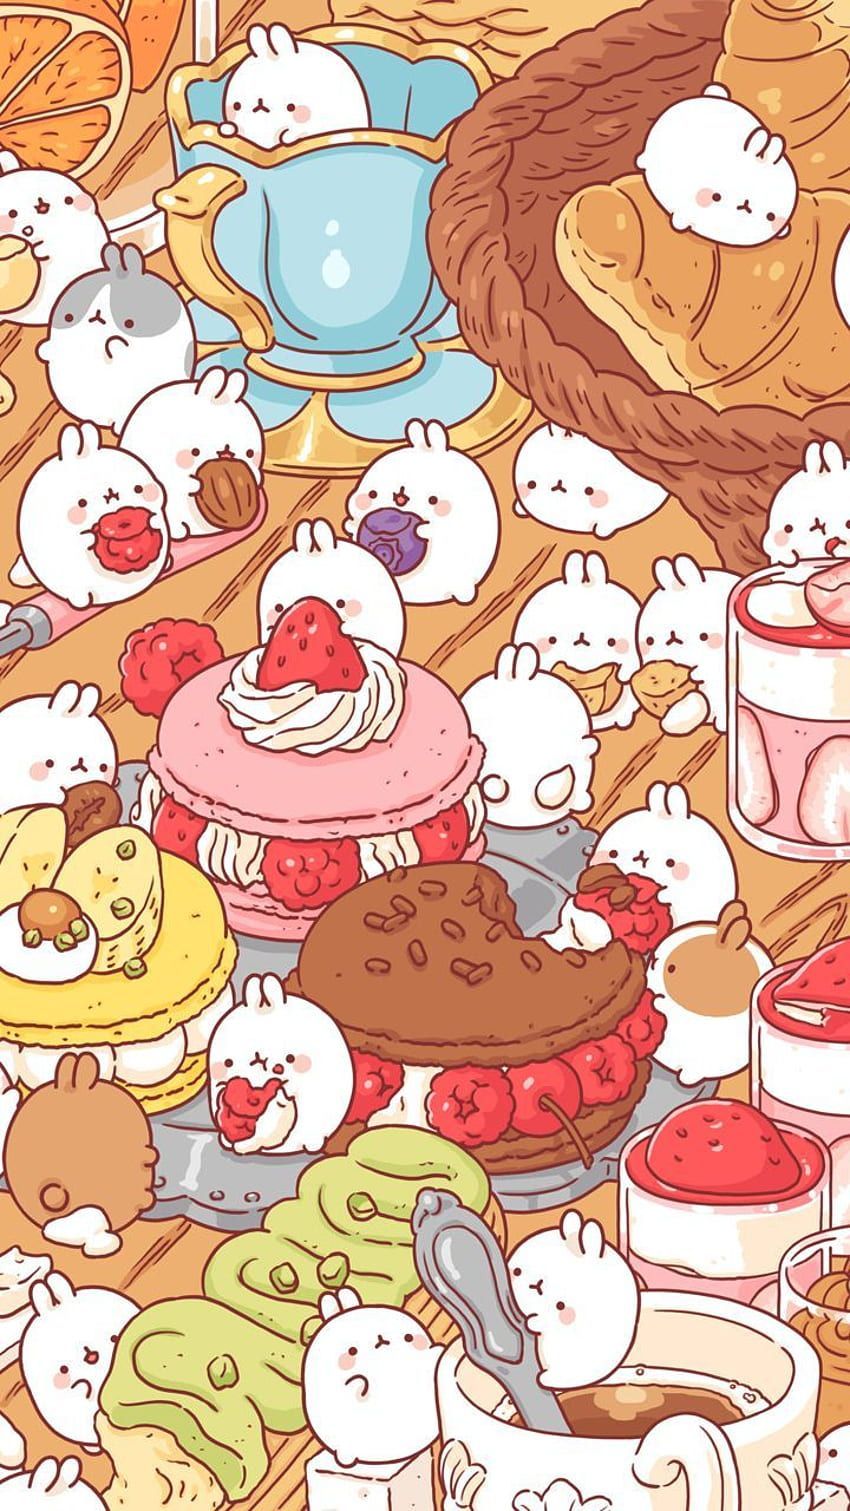 Molang rabbit cute wallpaper for phone with high-resolution 1080x1920 pixel. You can use this wallpaper for your iPhone 5, 6, 7, 8, X, XS, XR backgrounds, Mobile Screensaver, or iPad Lock Screen - Molang